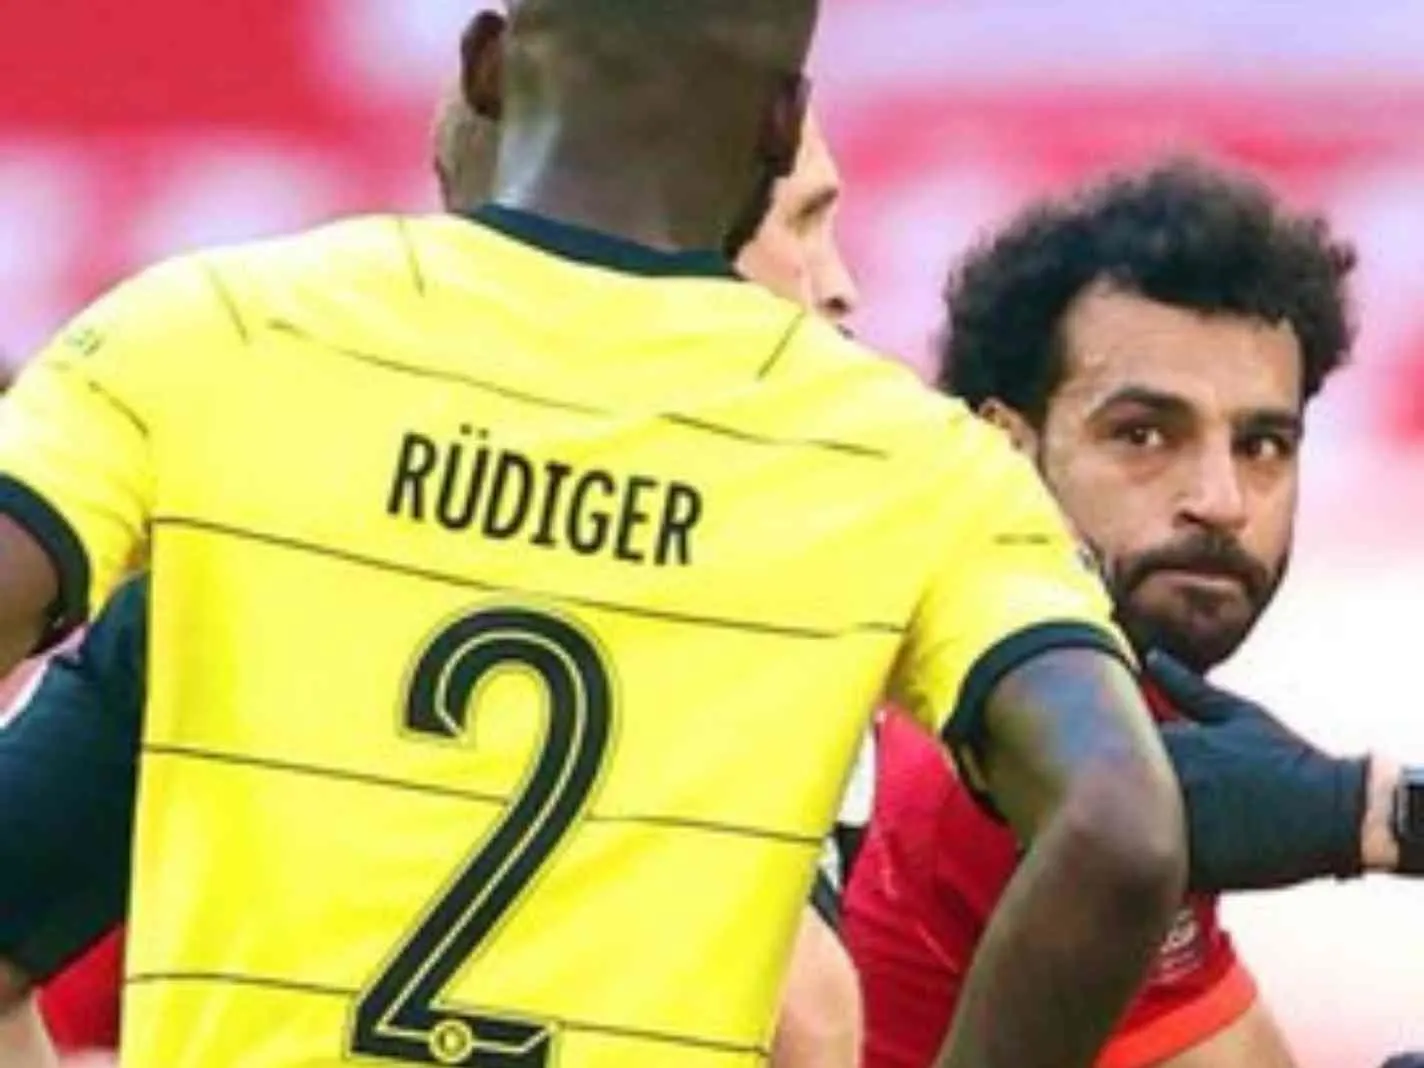 In this image - Mohamed Salah giving Antonio Rudiger a stern look during FA Cup final between Liverpool and Chelsea.